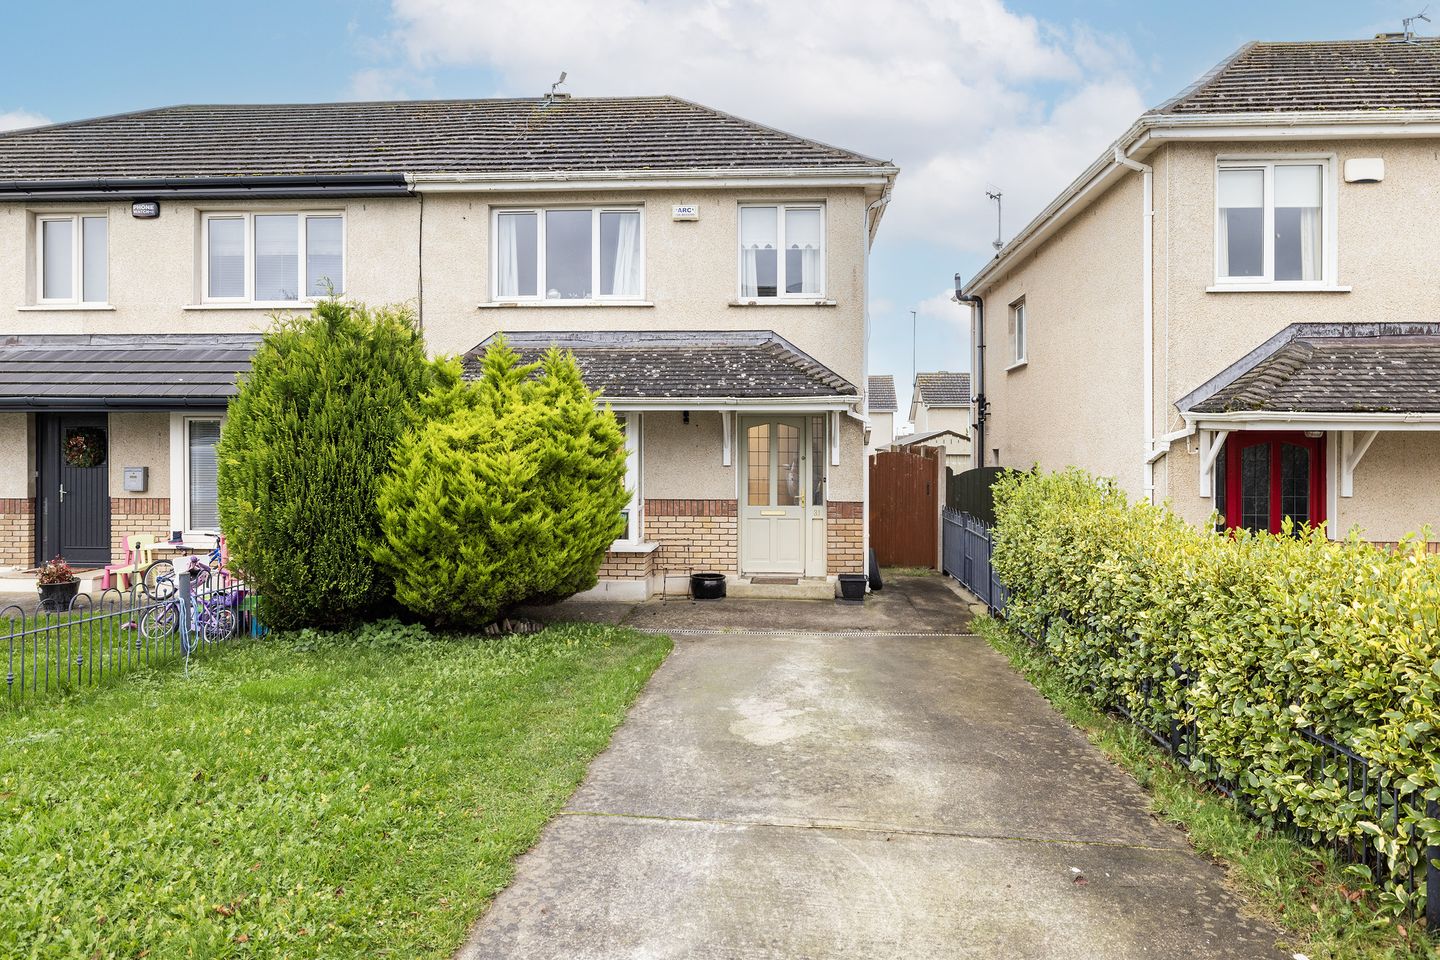 31 Forgehill Crescent, Stamullen, Co. Meath, K32AY66